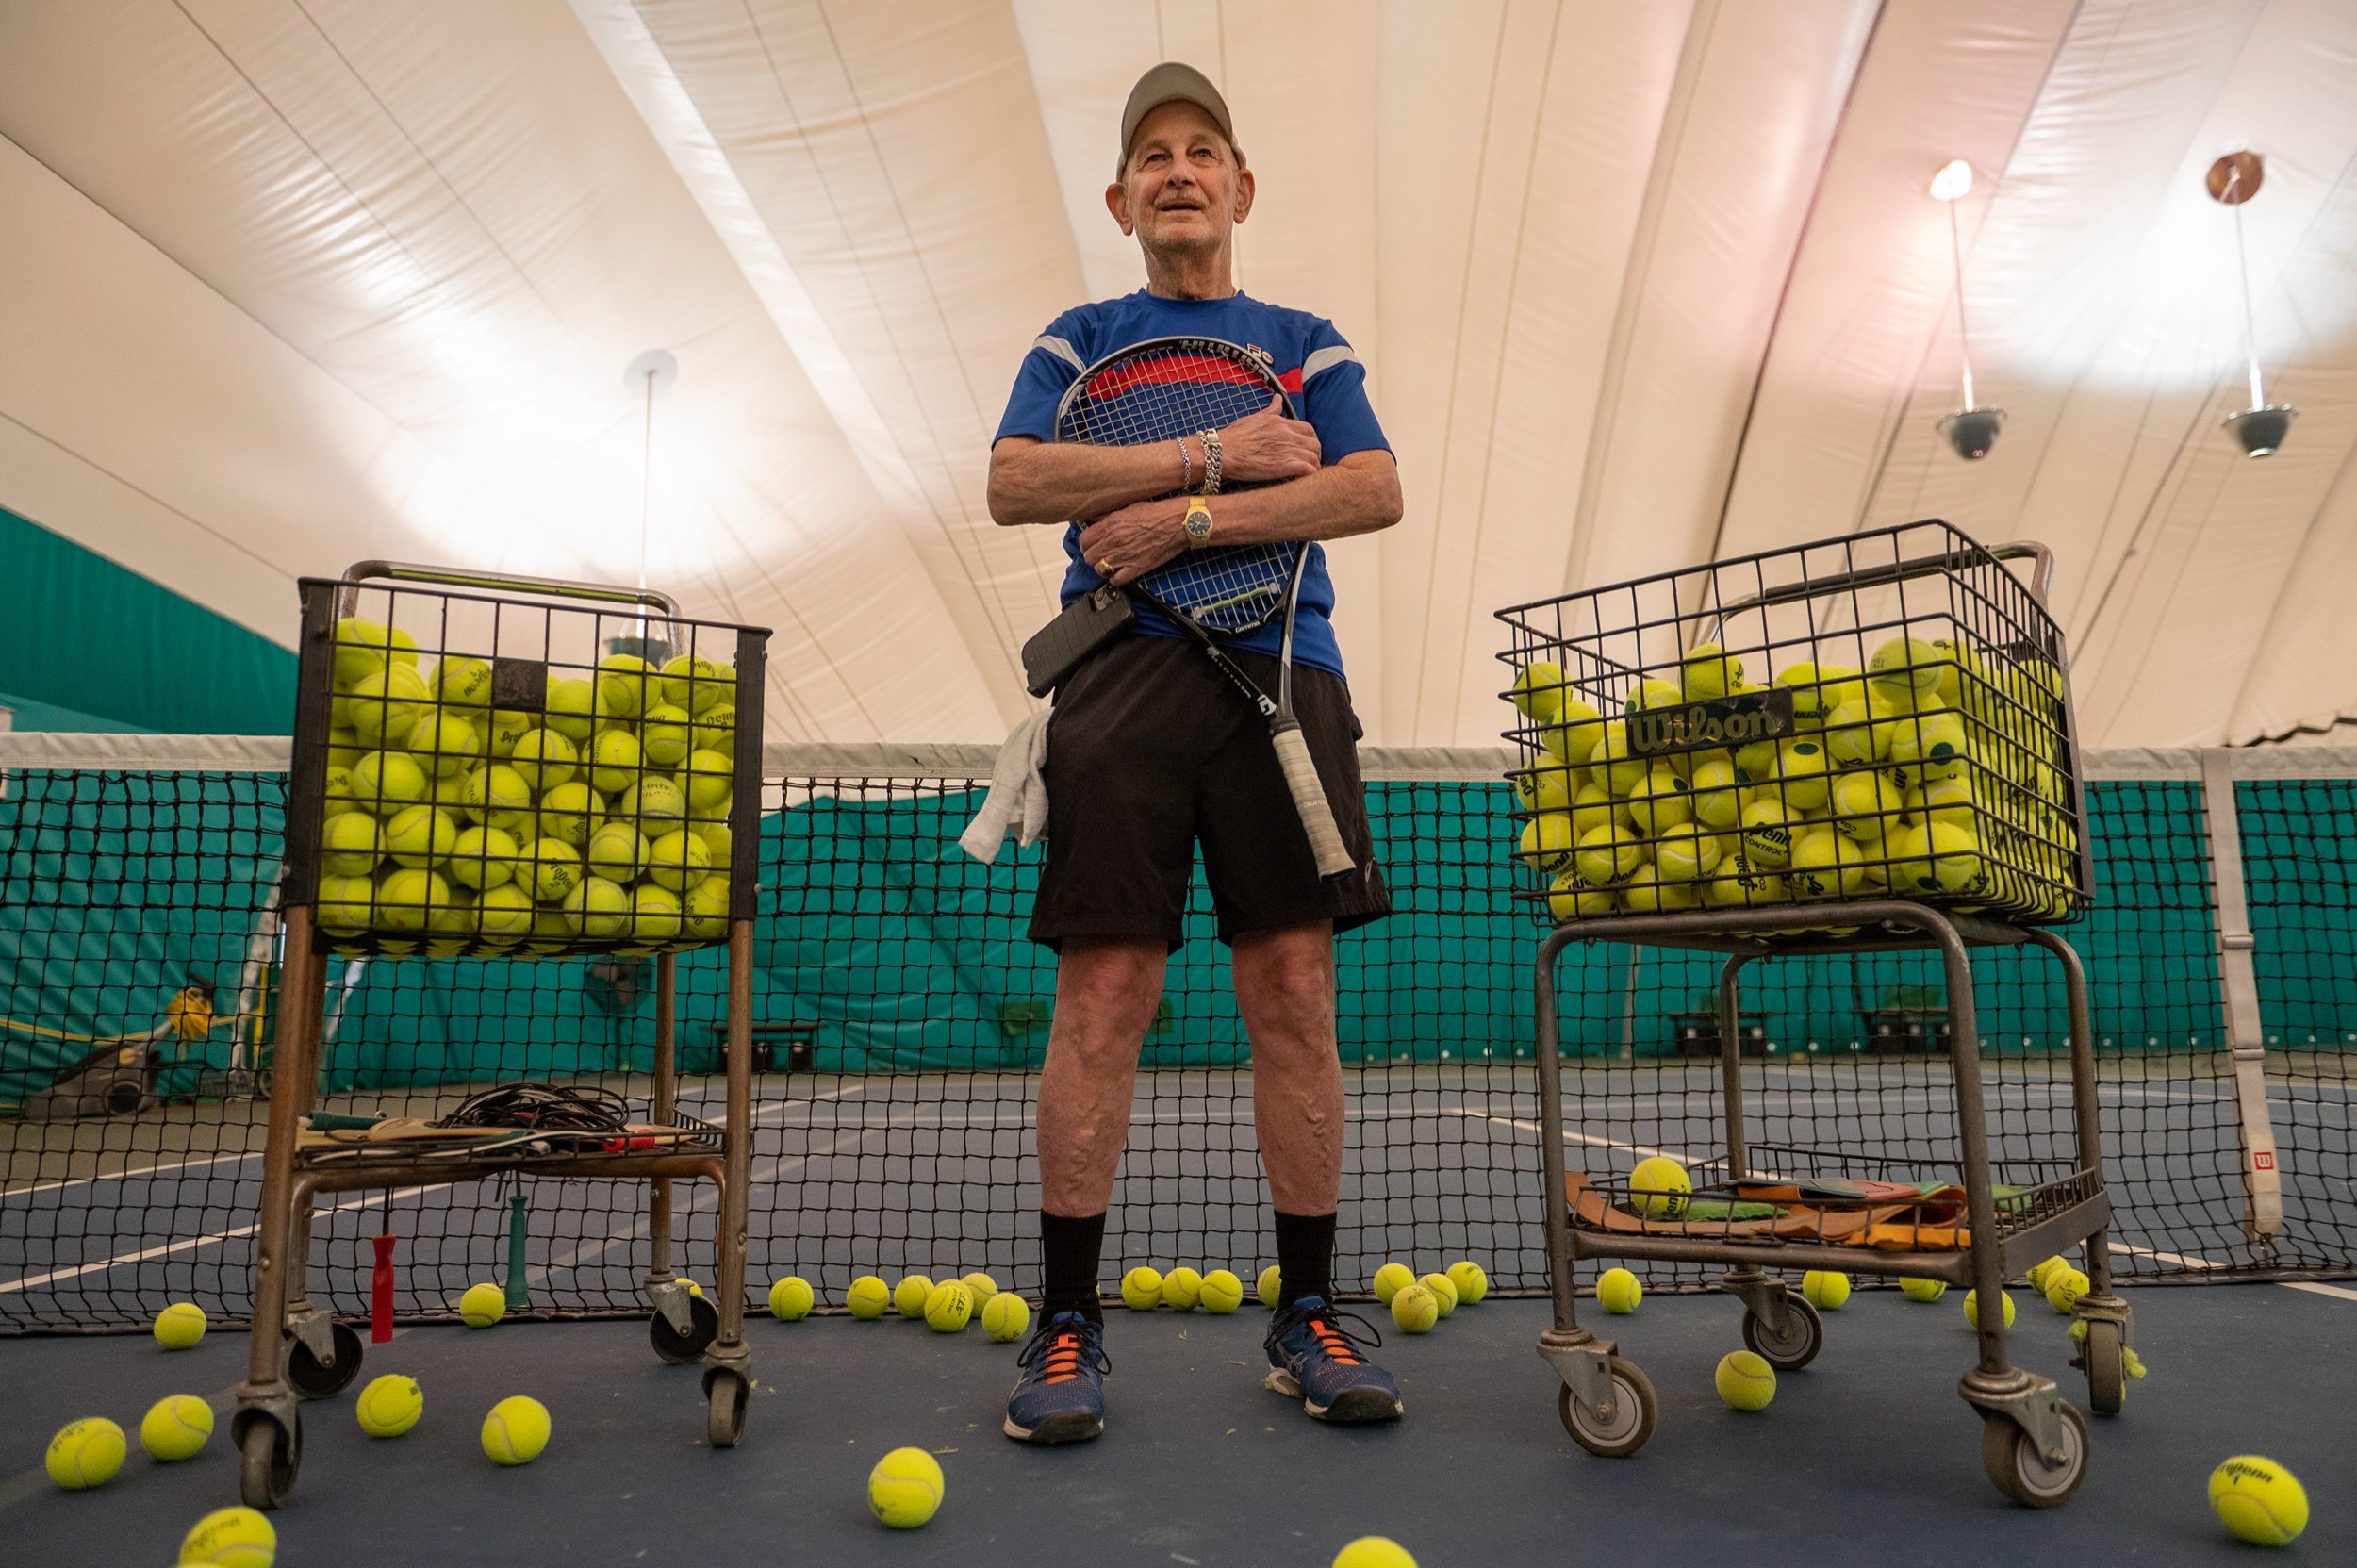  Eighty-year-old Ray Lake holds his tennis racket at Woodside Health and Tennis Club on Monday, March 13, 2023, in Westwood, Kan. A semi-retired psychiatrist, Lake has been competing in United States Tennis Association league matches since the 1970s.